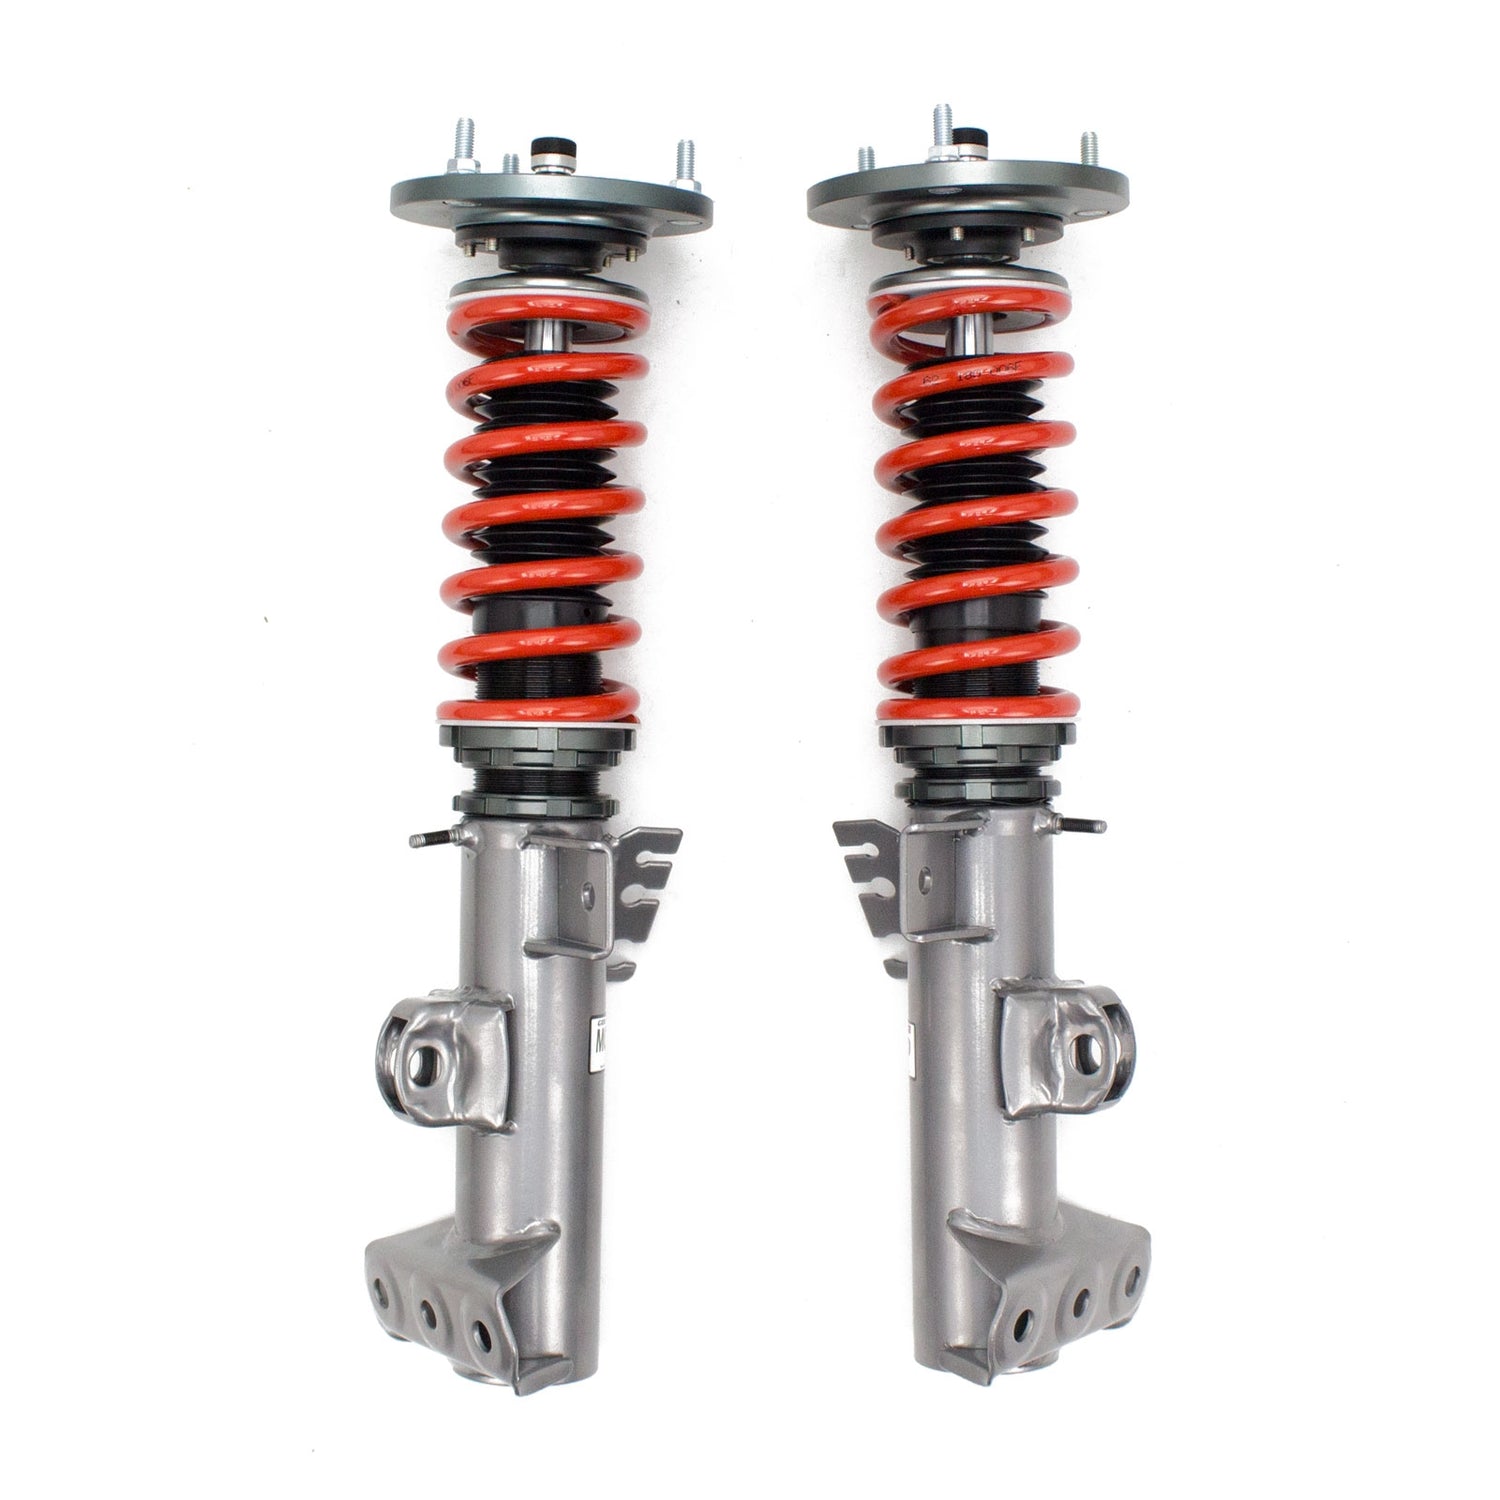 Godspeed MRS1416 MonoRS Coilovers Lowering Kit, True Coilover Conversion, 32 Damping Adjustments, Ride Height Ajustable